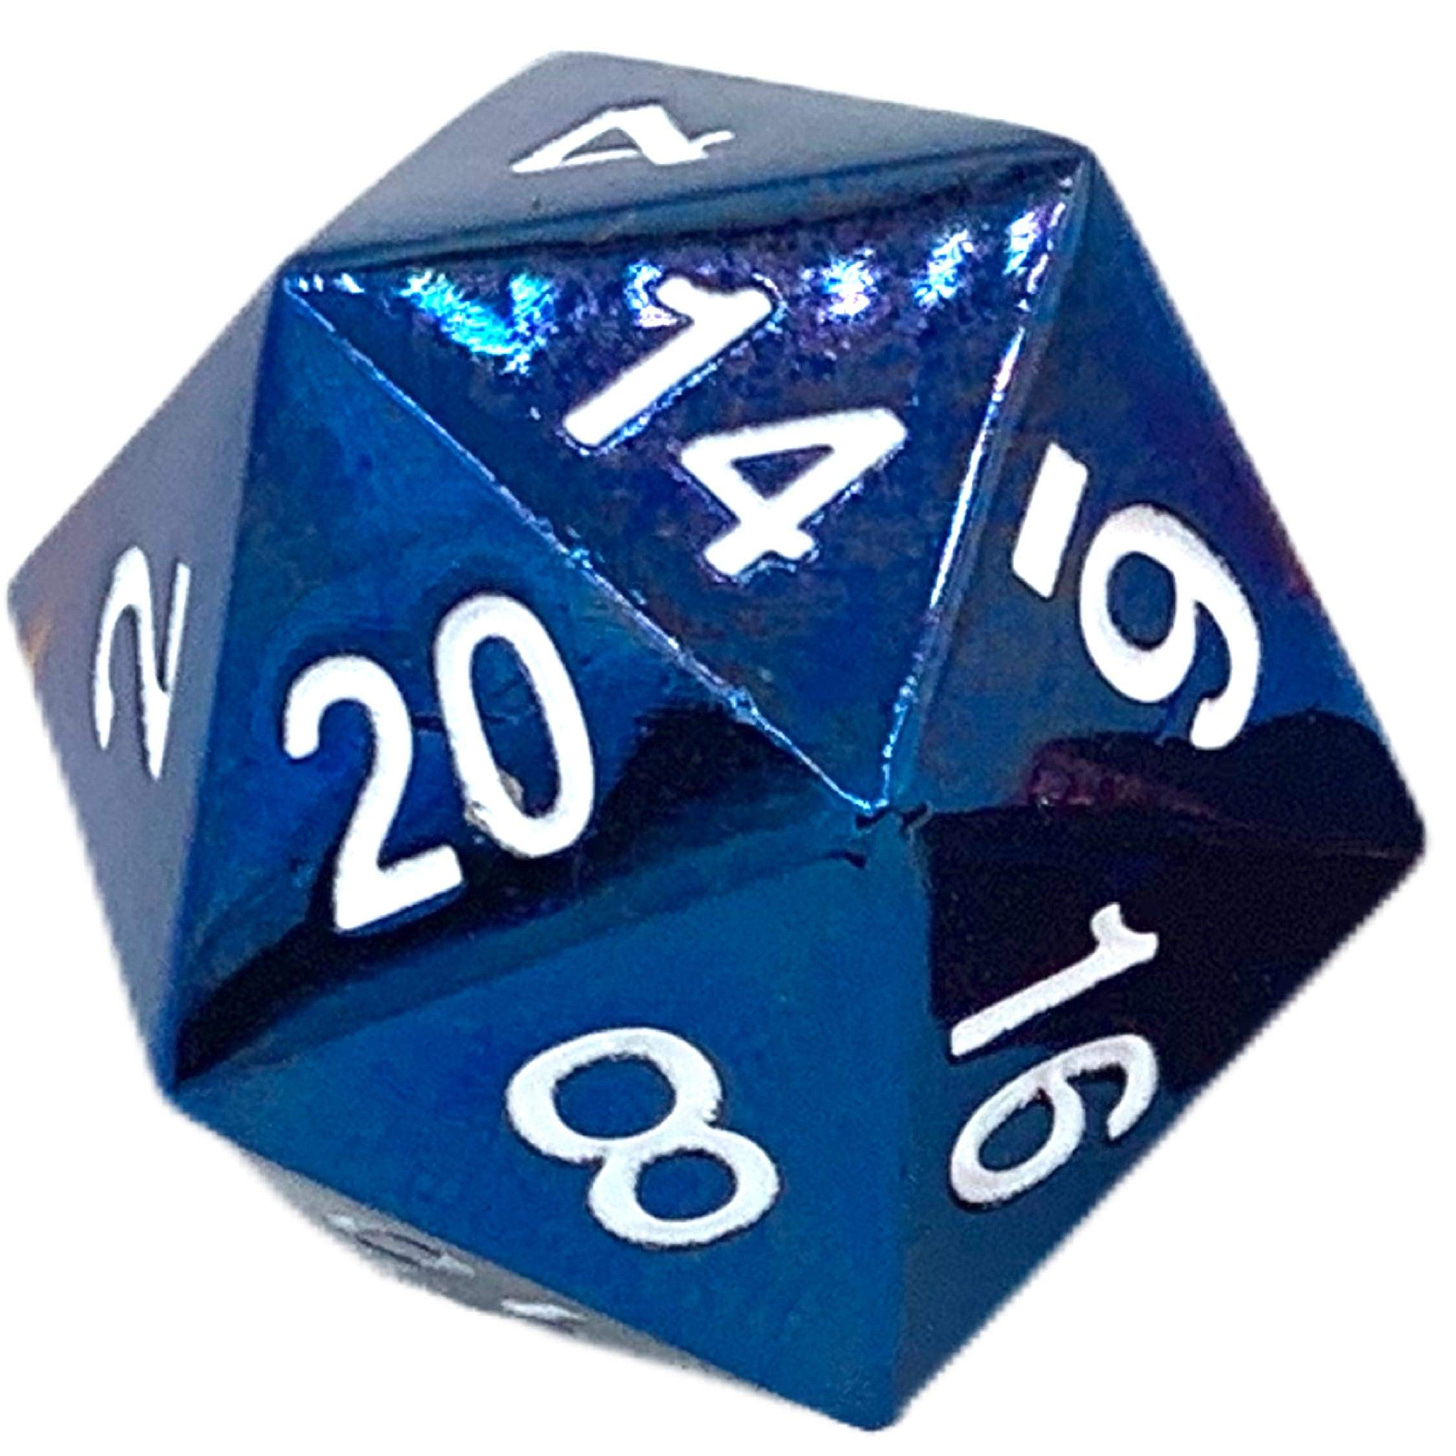 Amazon.com: RPG Dice - Metal MTG & DND of D20 Polyhedral Die for Dungeons  and Dragons, Magic The Gathering & More - 20 Sided, Solid Metallic,  Balanced Feel with Smooth Blue Finish